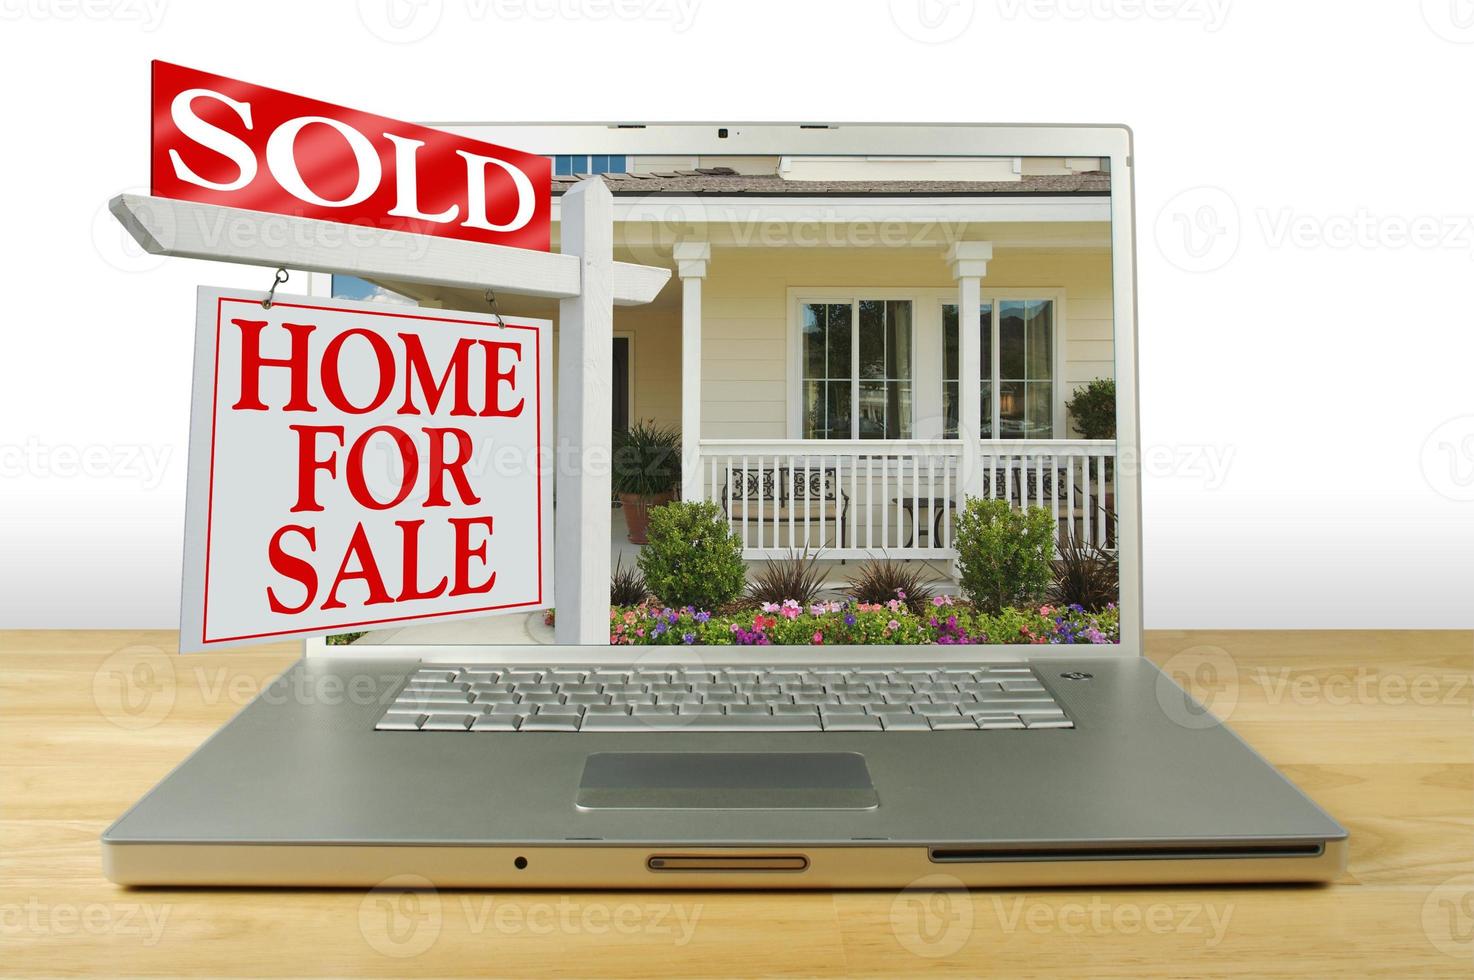 Sold Home For Sale Sign on Laptop photo